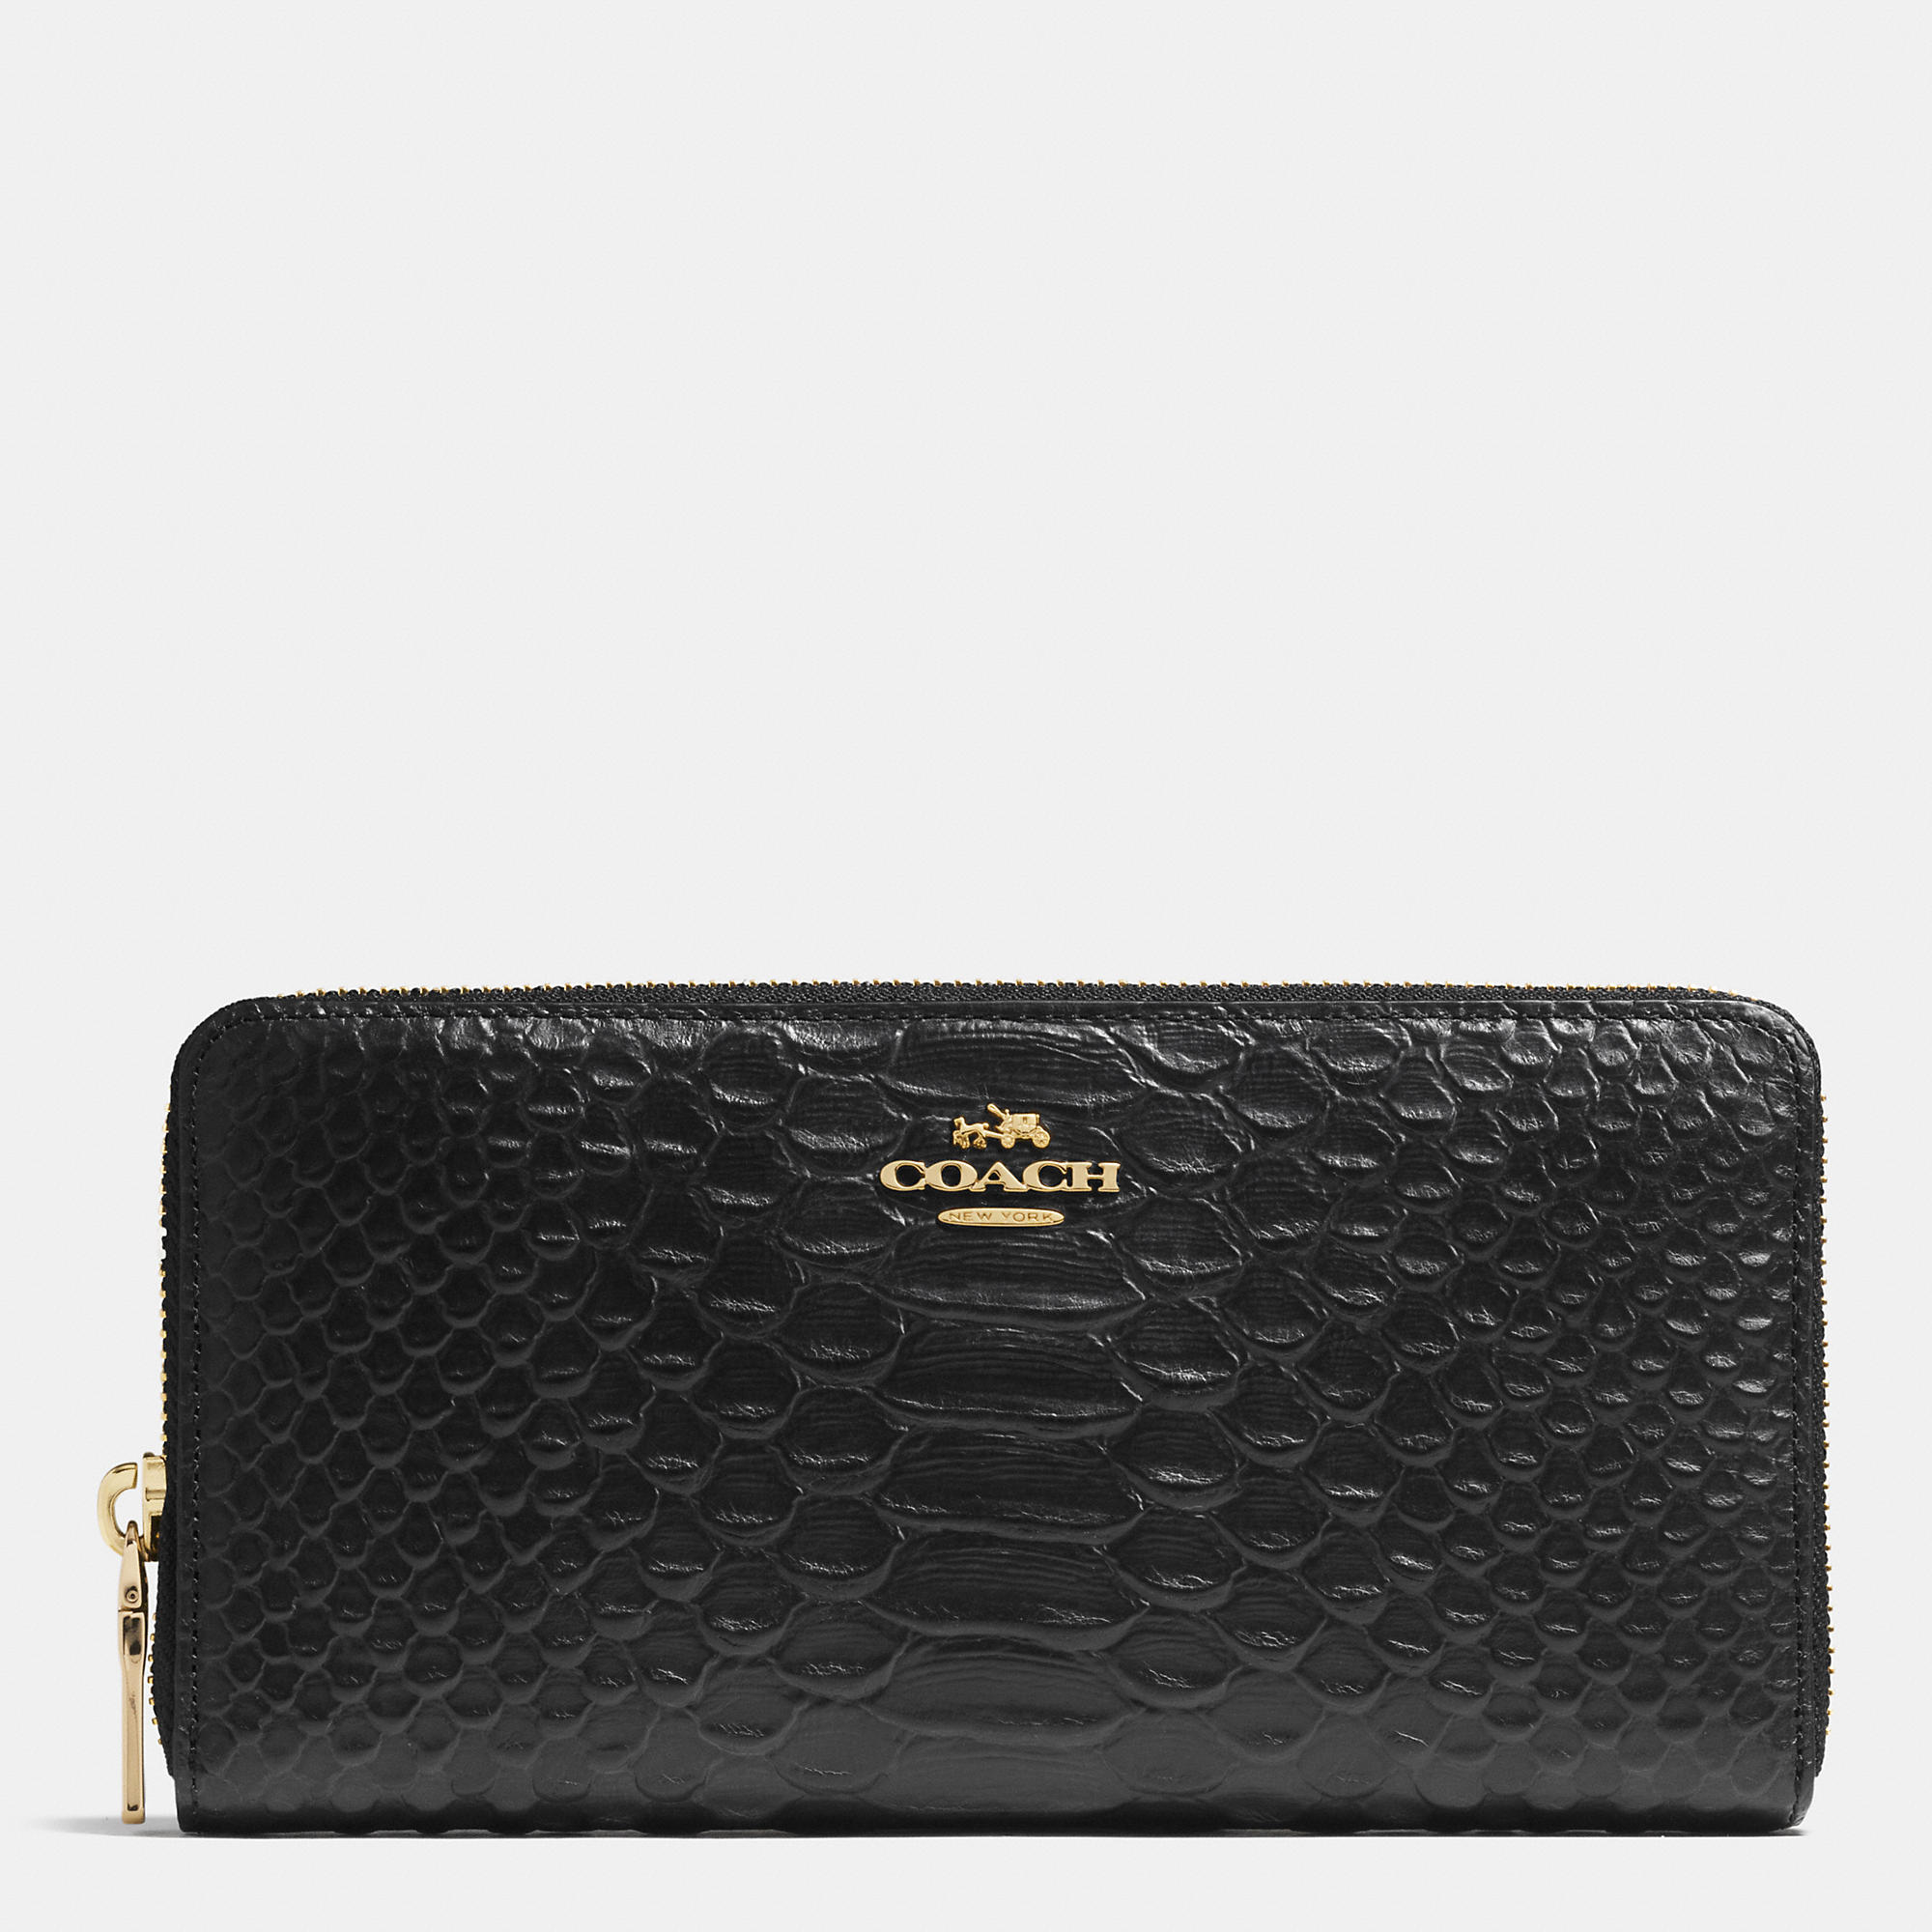 COACH Accordion Zip Wallet In Snake Embossed Leather in Light Gold/Black (Black) - Lyst